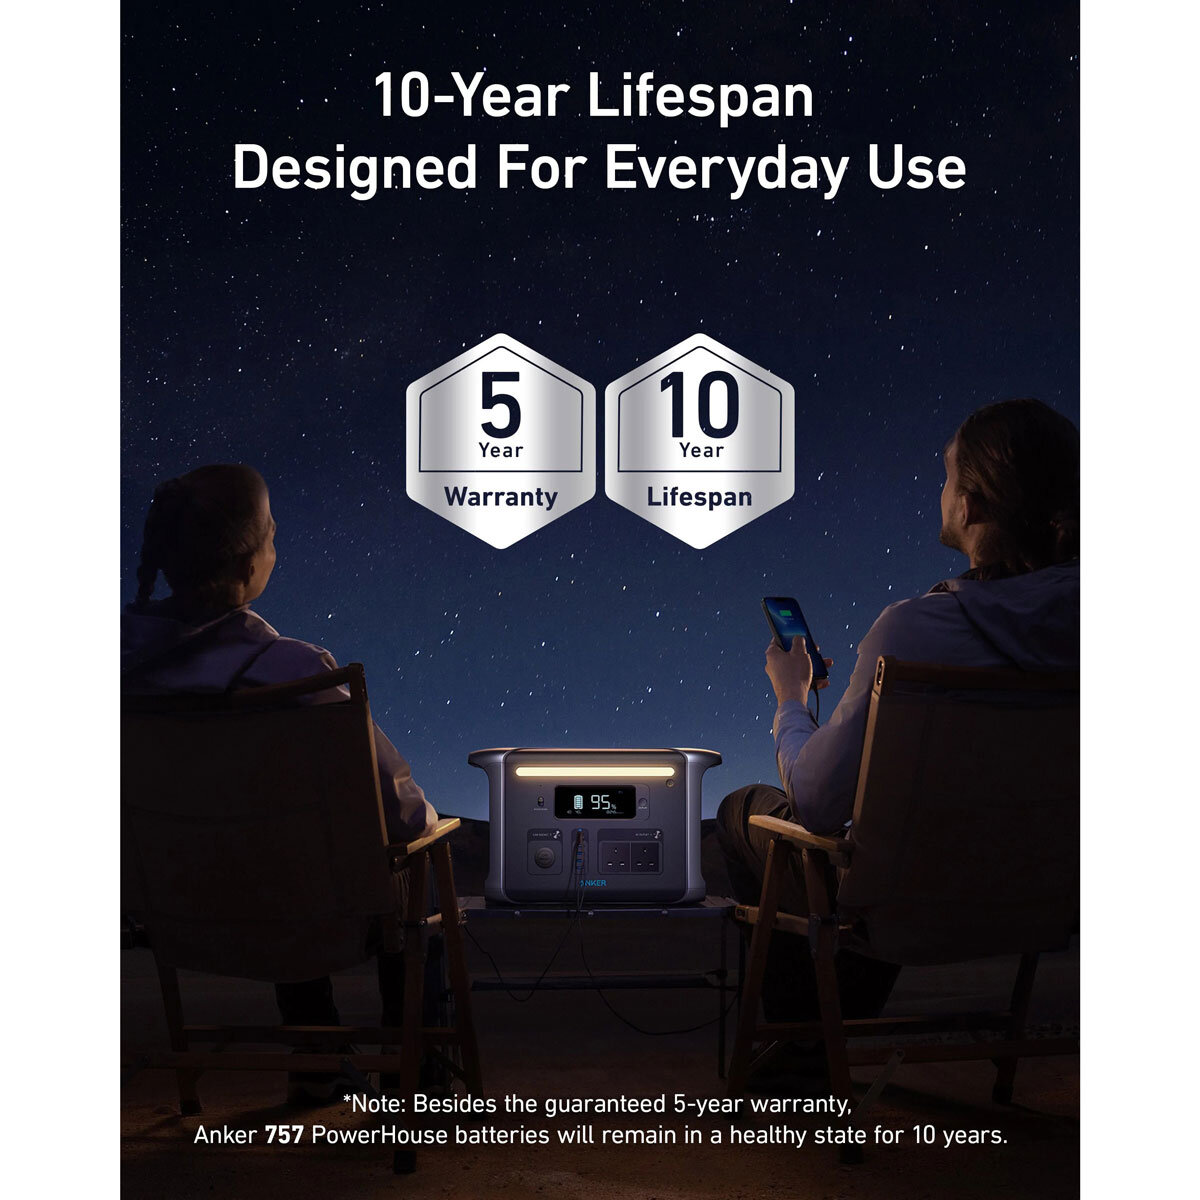 Lifestyle image showing quick charge capabilities